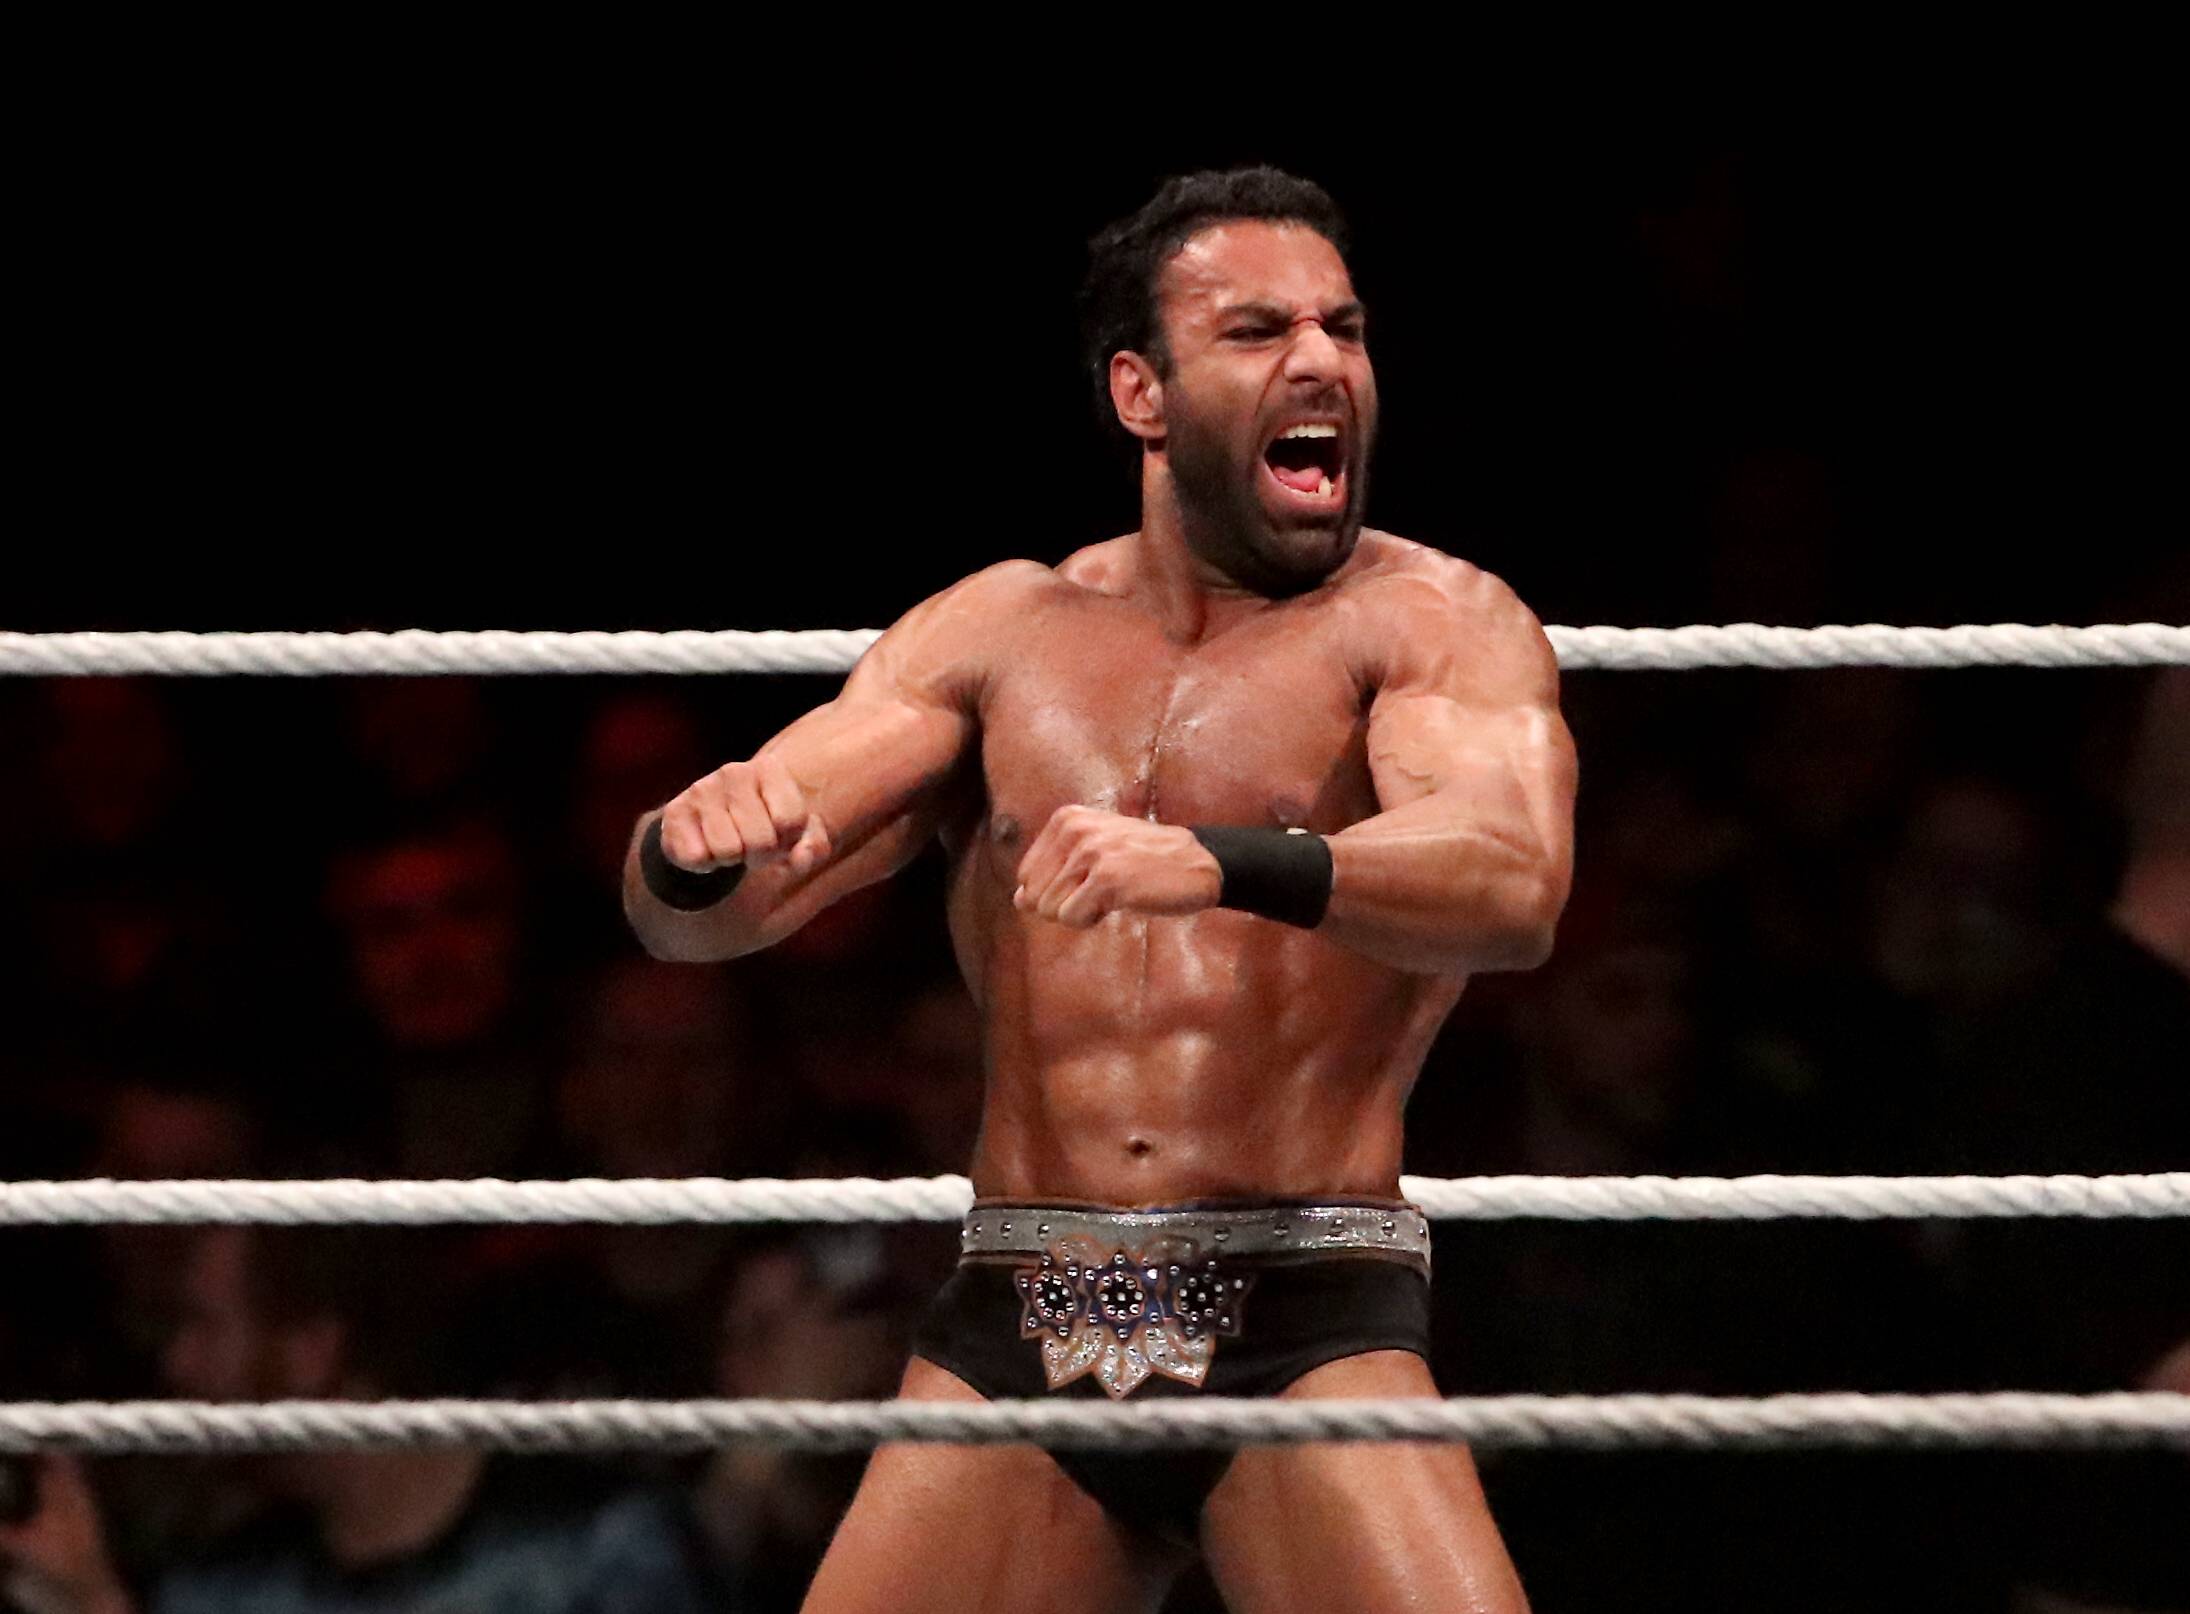 Here is everything about Jinder Mahal's teammates Veer and S